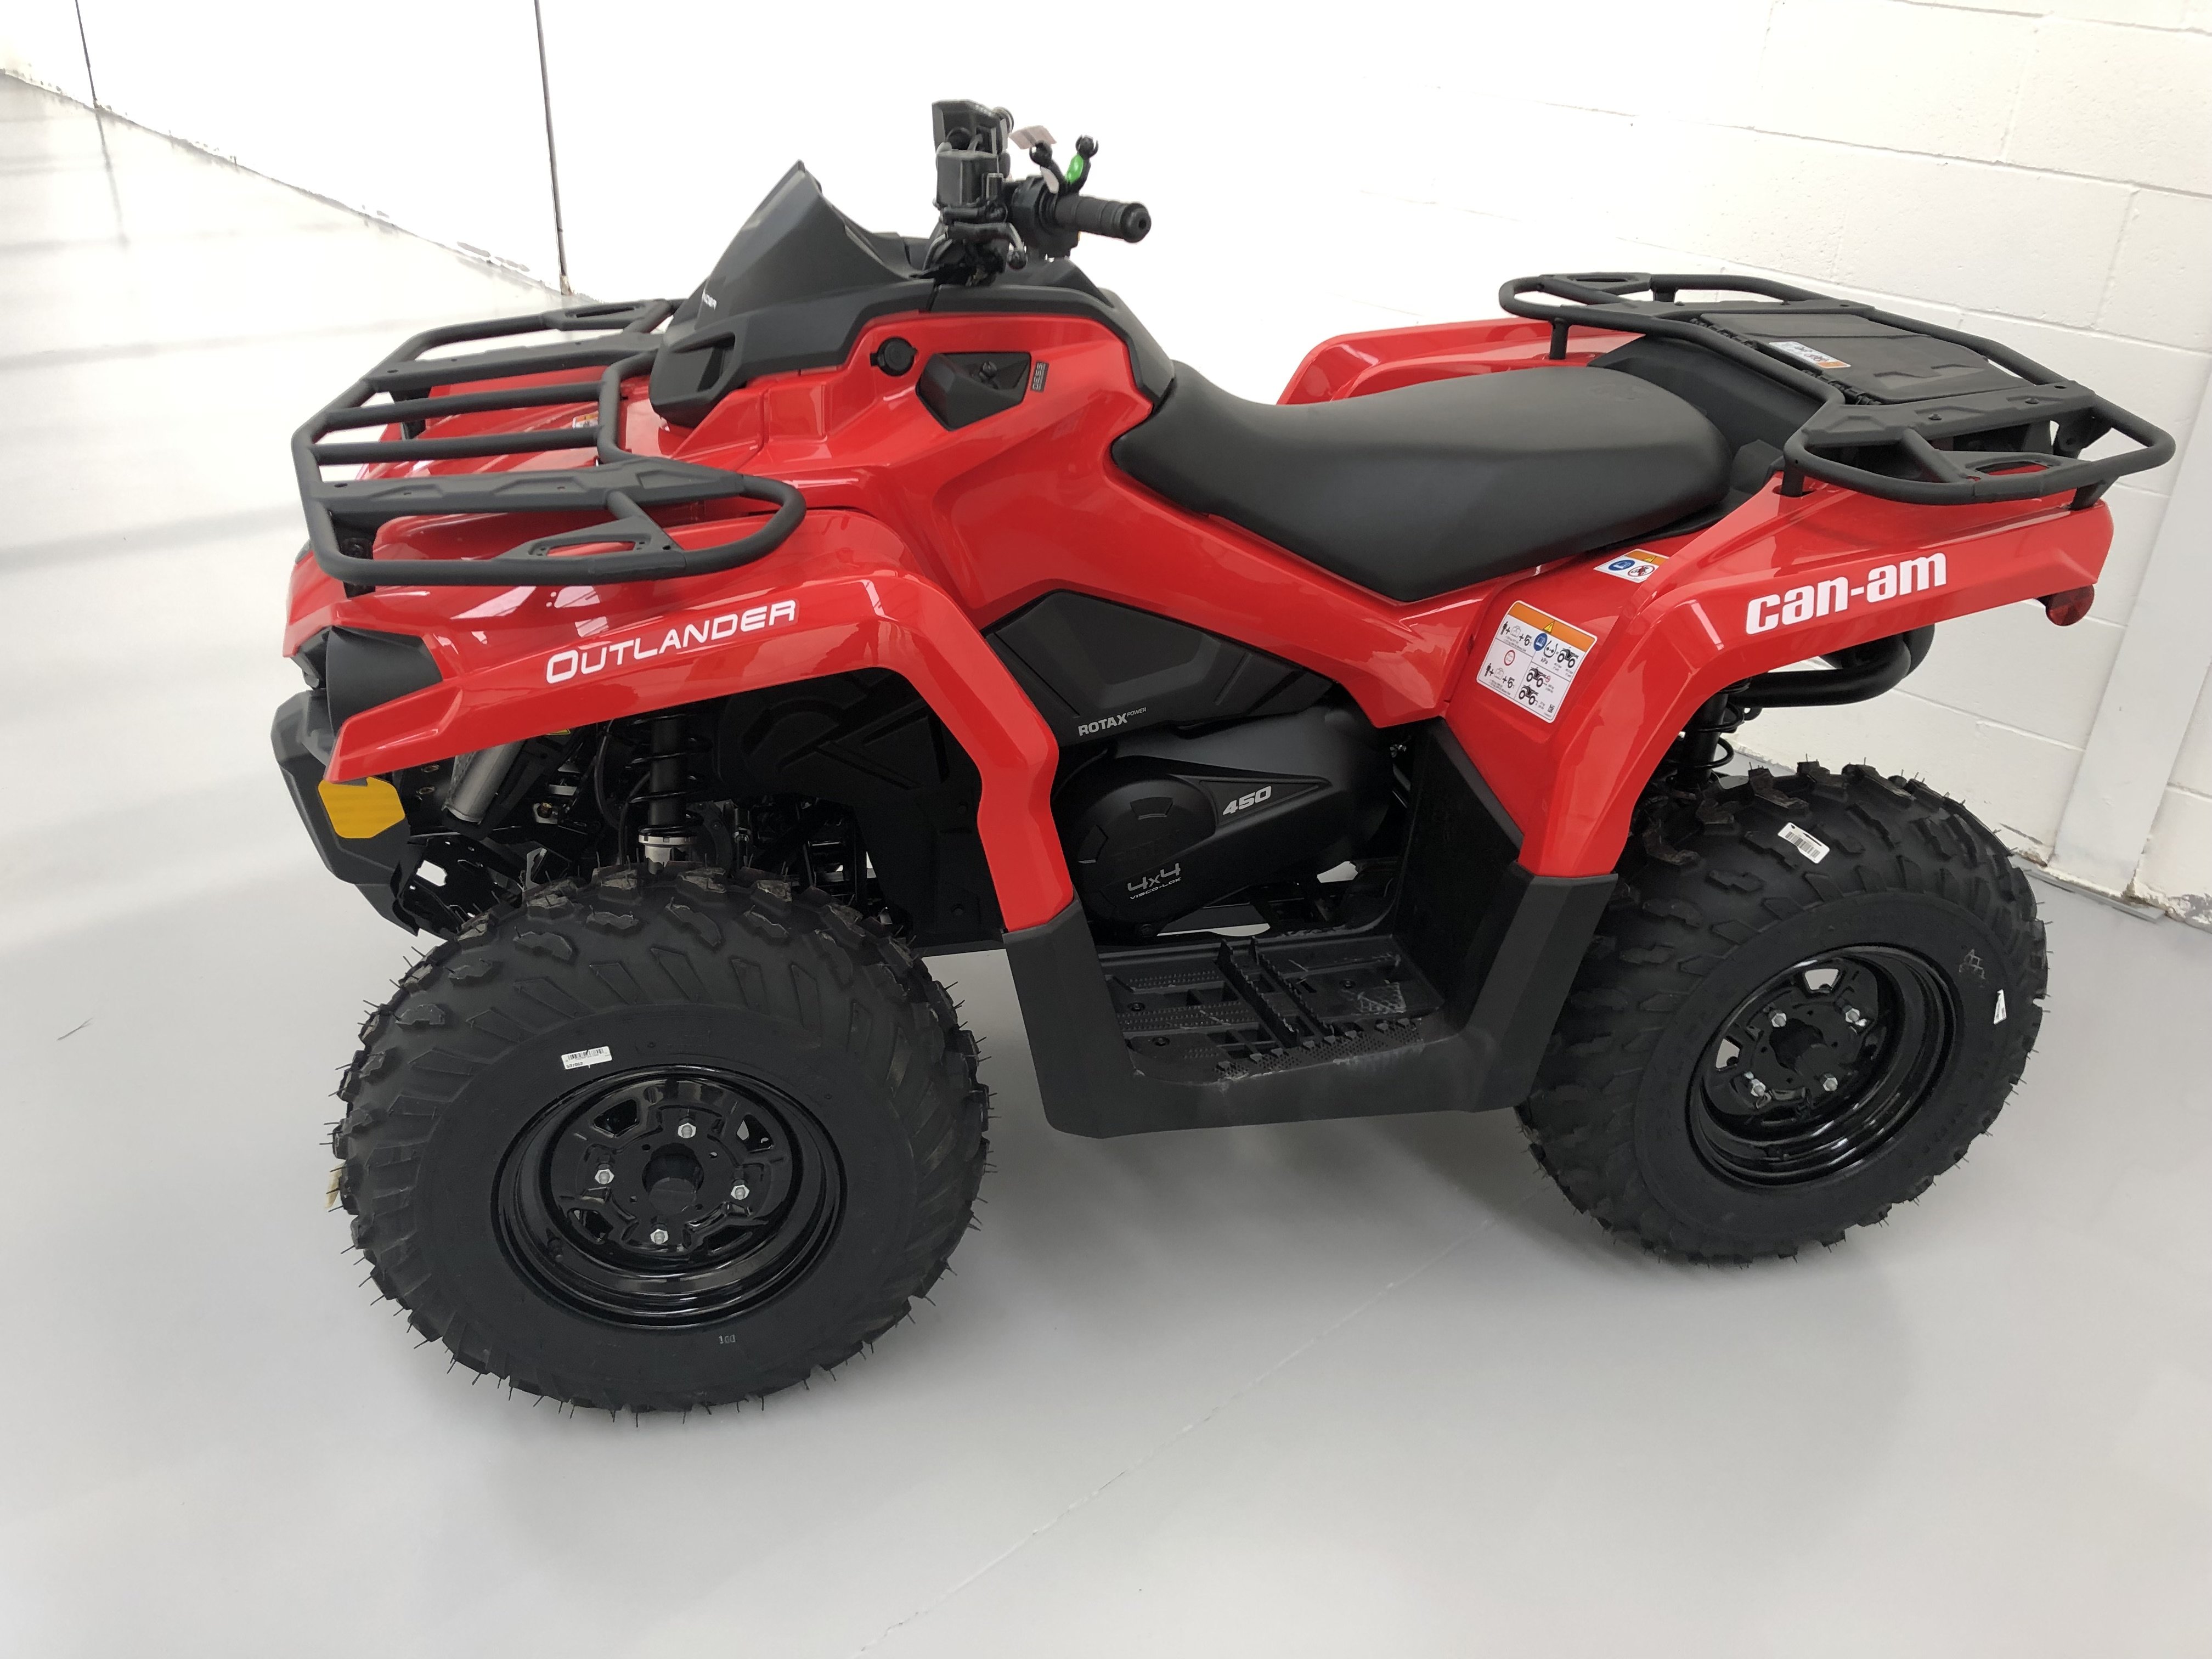 *SPECIAL OFFER* CAN-AM OUTLANDER 450